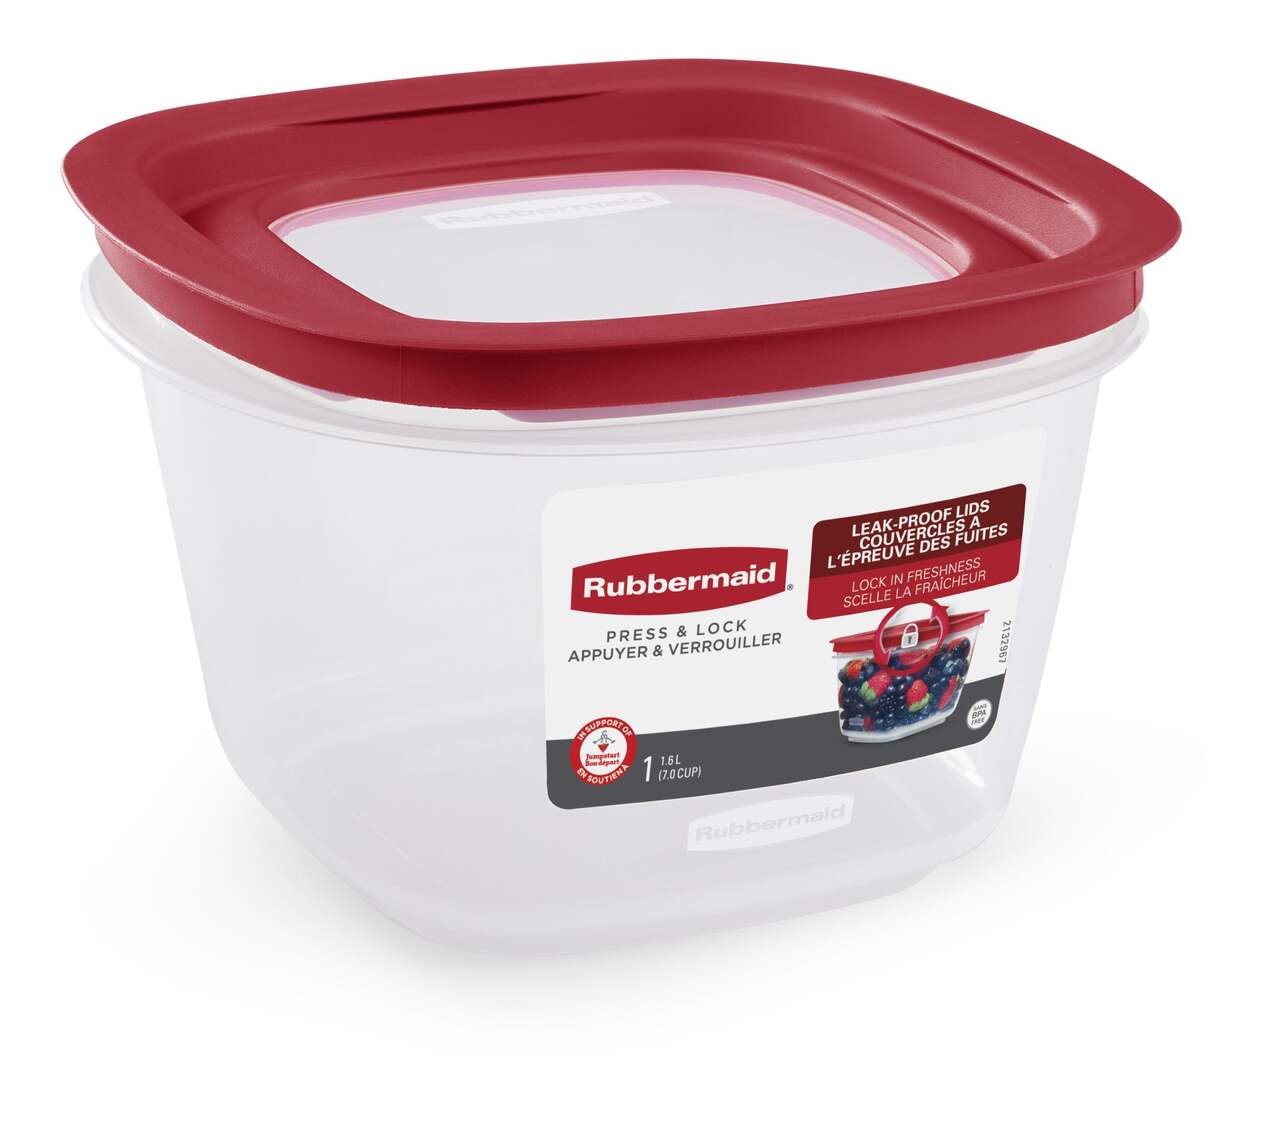 https://media-www.canadiantire.ca/product/living/kitchen/food-storage/1429330/rubbermaid-pressnlock-7-cup-52febae8-ad9a-4c59-bff1-a9f2b423bfee-jpgrendition.jpg?imdensity=1&imwidth=1244&impolicy=mZoom